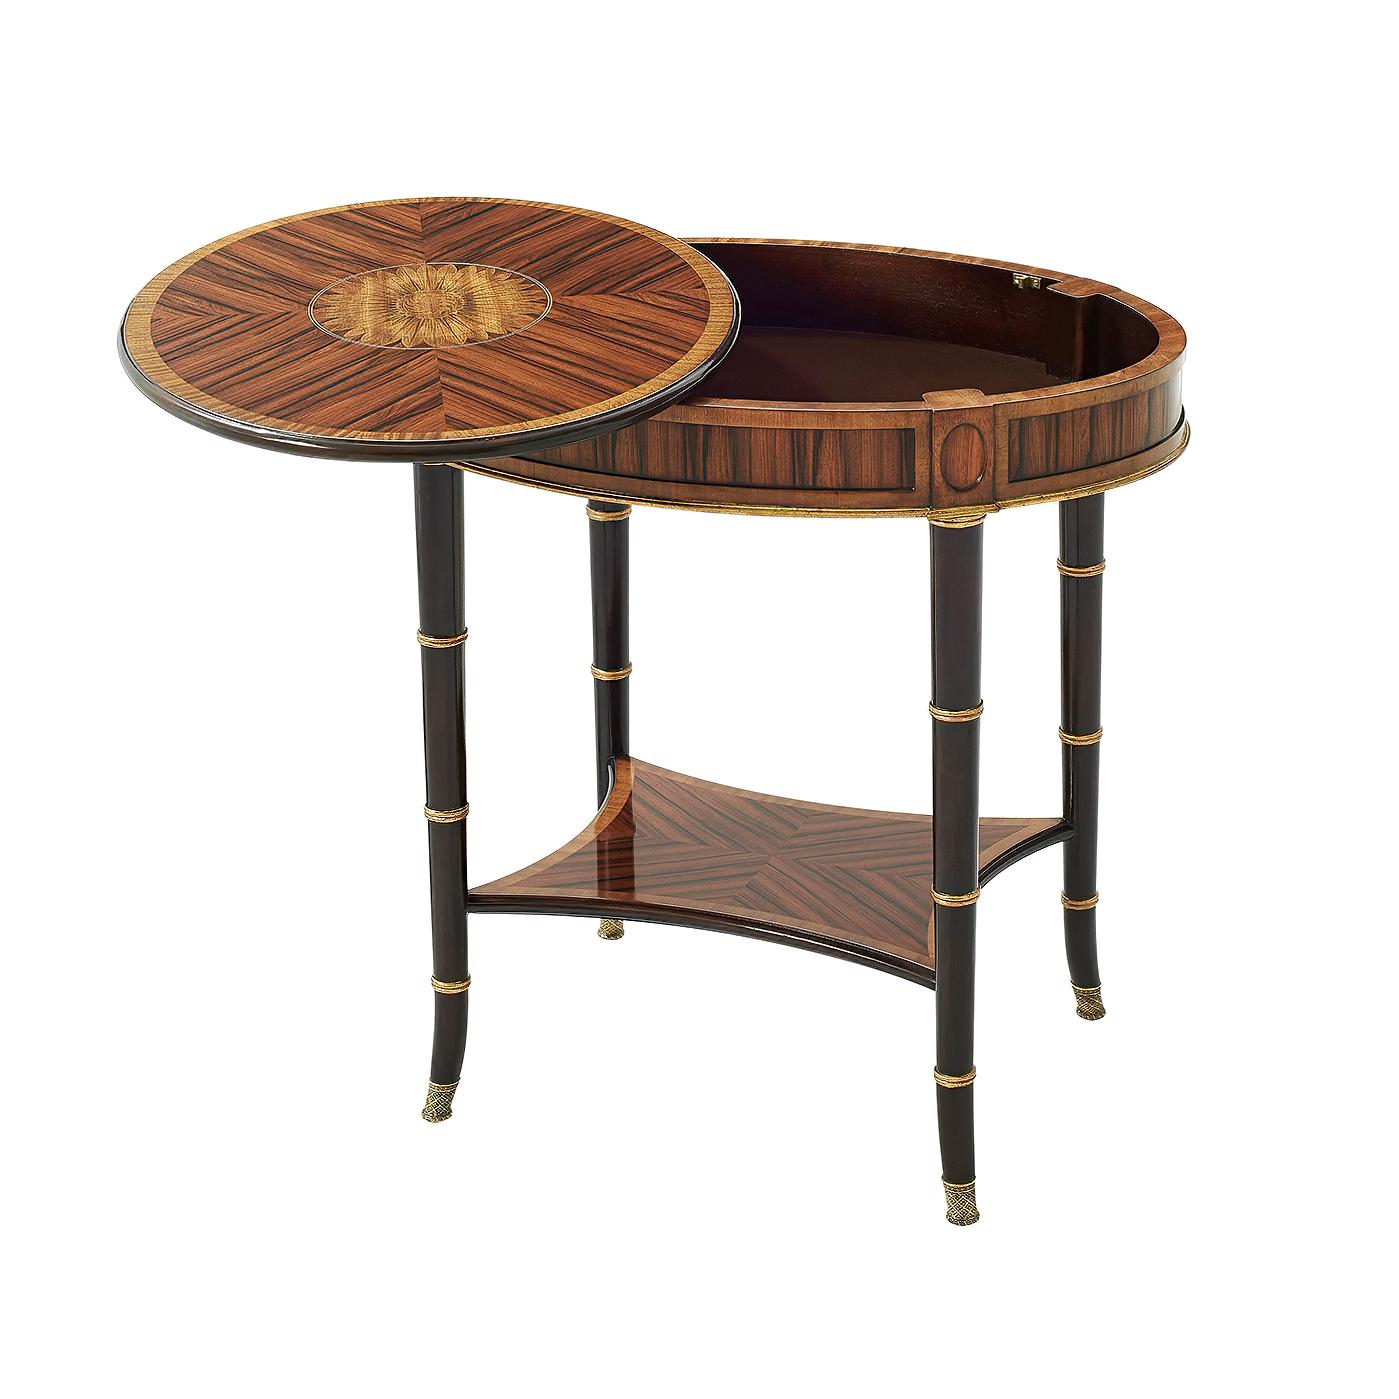 A Regency style oval side table, with a Morado and satinwood veneers, the oval molded edge top with a floral oval penwork detail inlay, above a crossbanded frieze and on ebonized and gilt ring turned mahogany splayed legs terminating in finely cast